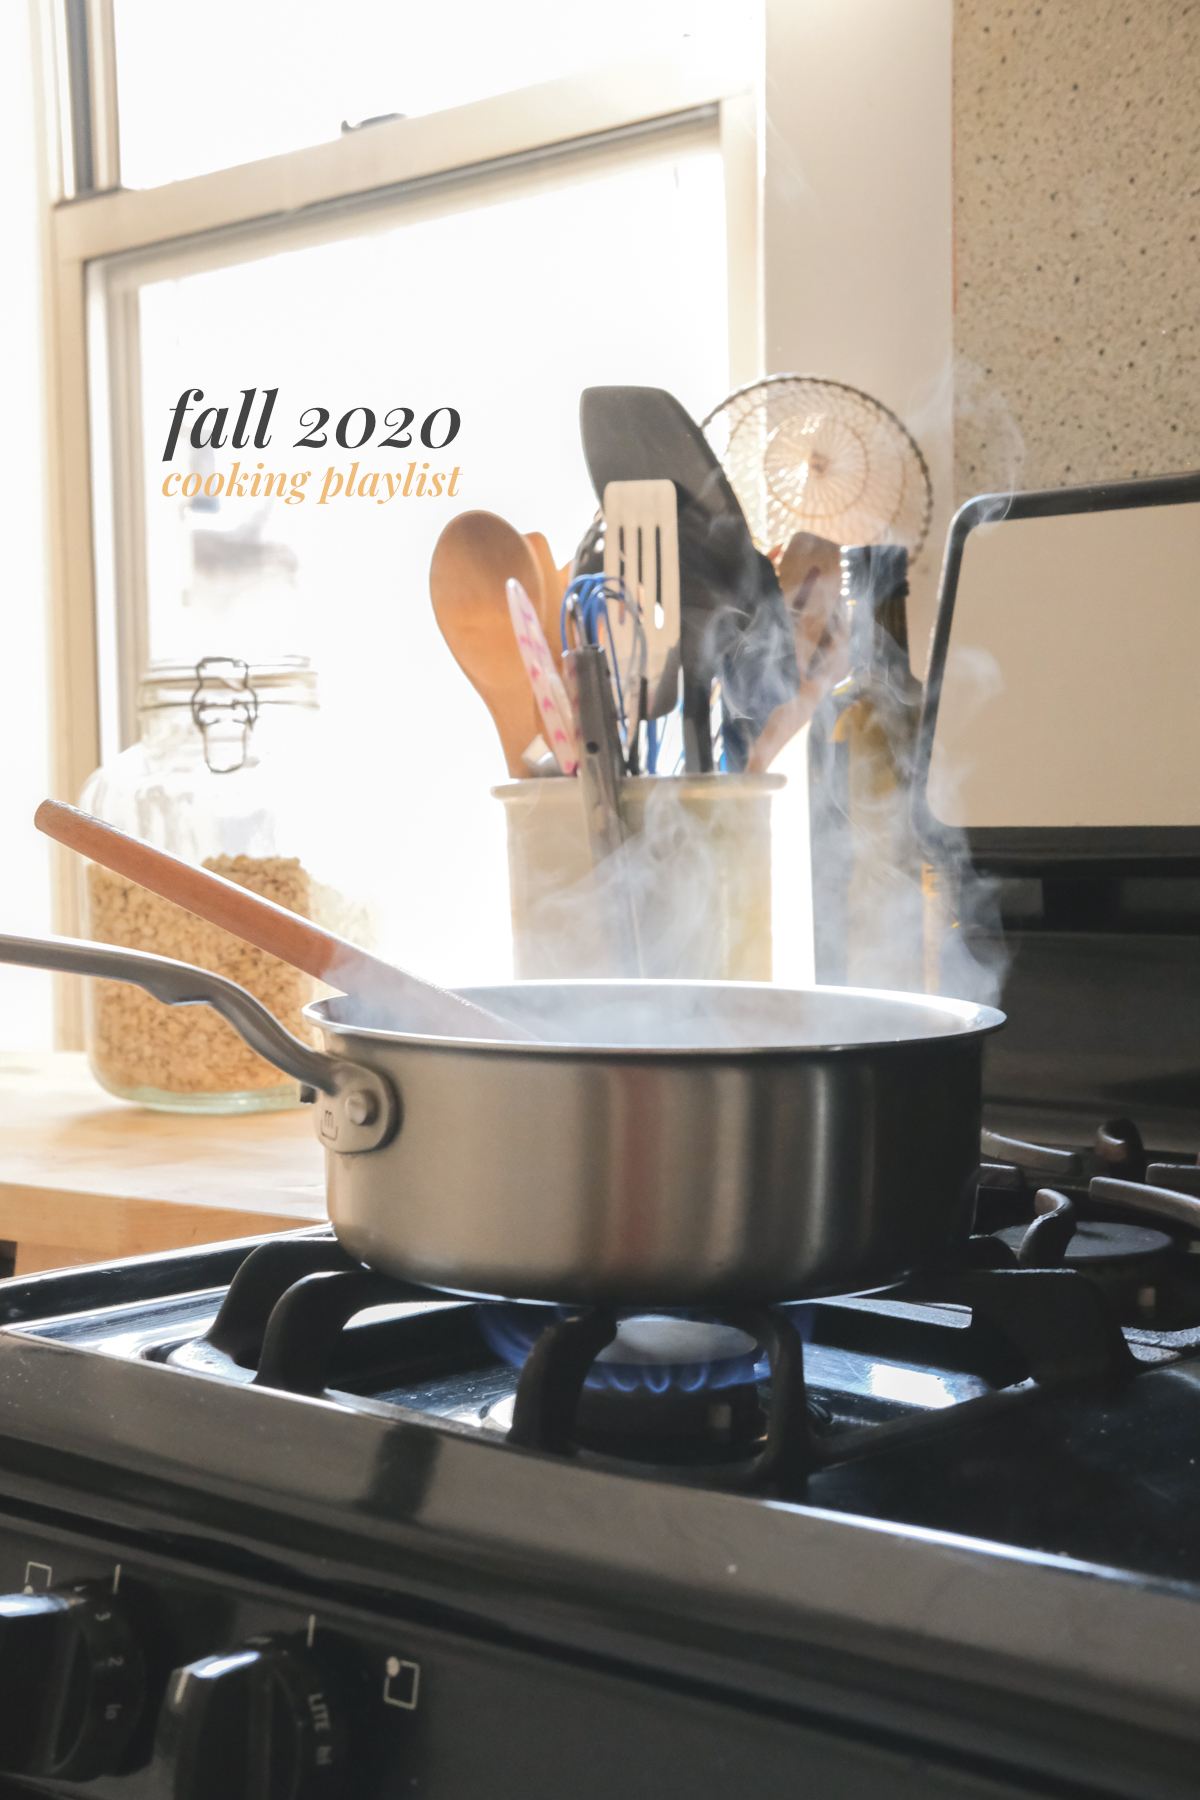 My Cooking Playlist for Fall 2020